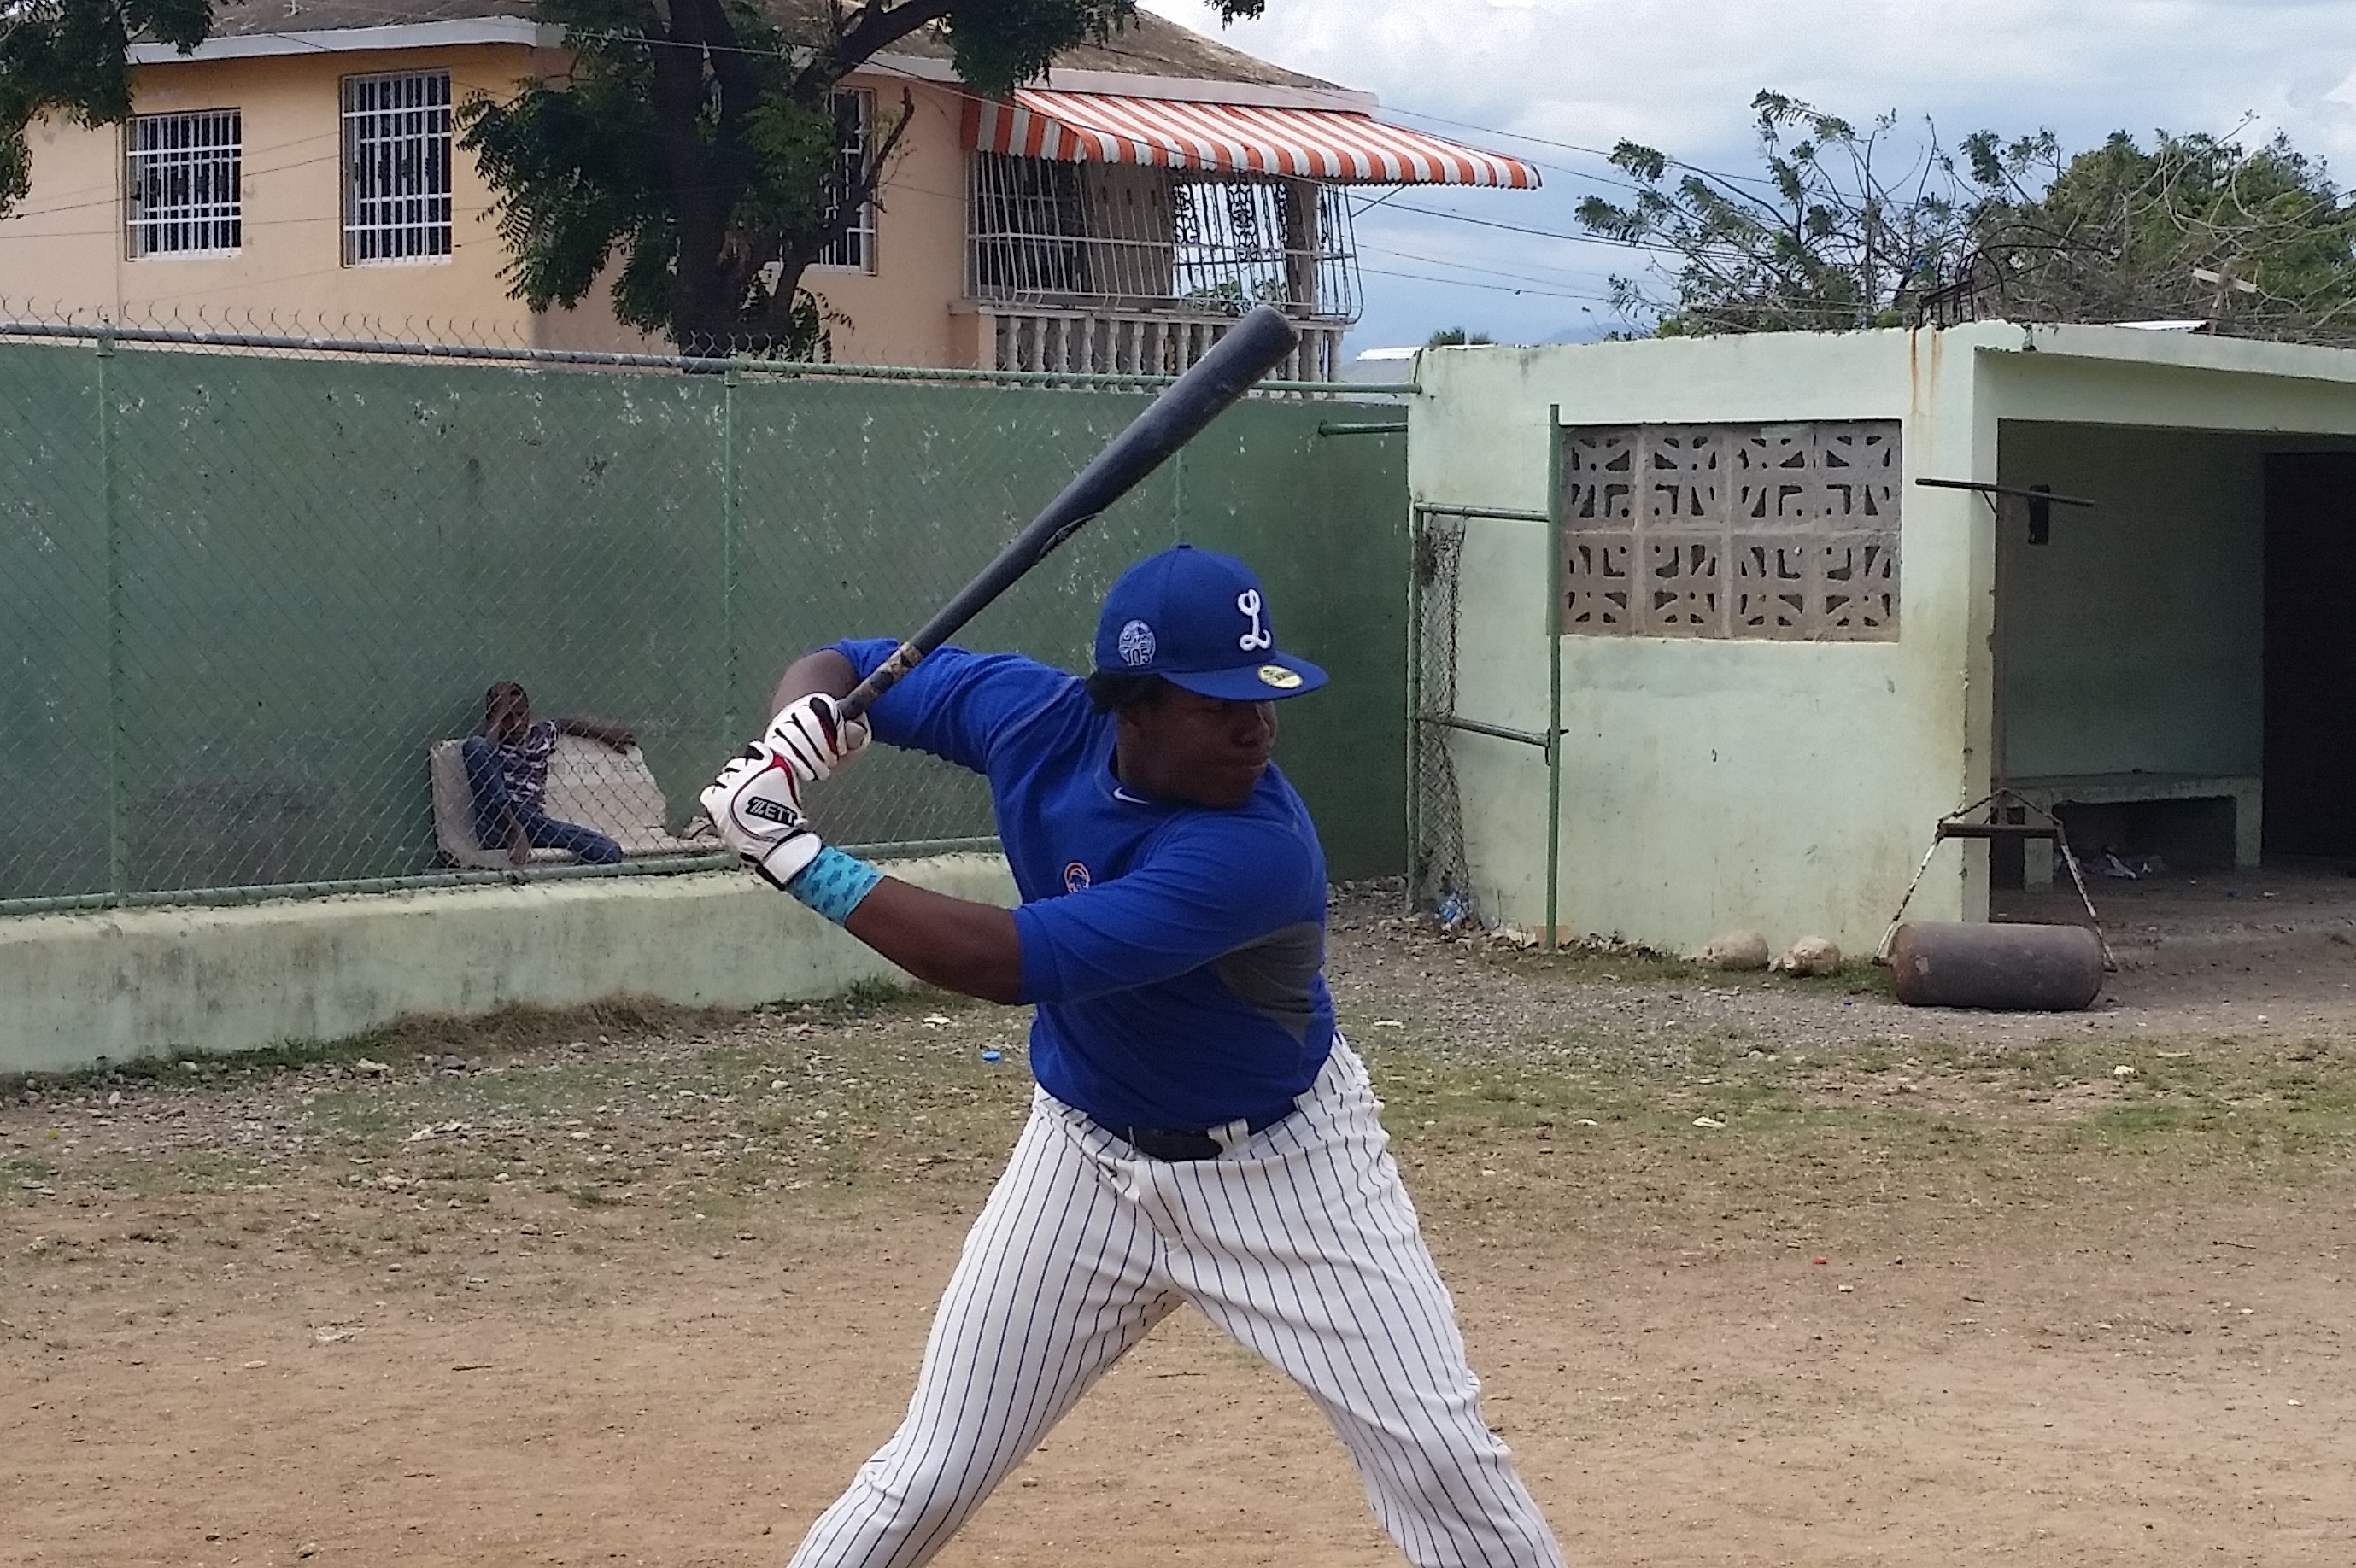 Family Feud: Vladimir Guerrero Jr. rules out ever playing for New York  Yankees, talks about origins of age old beef from his father's career